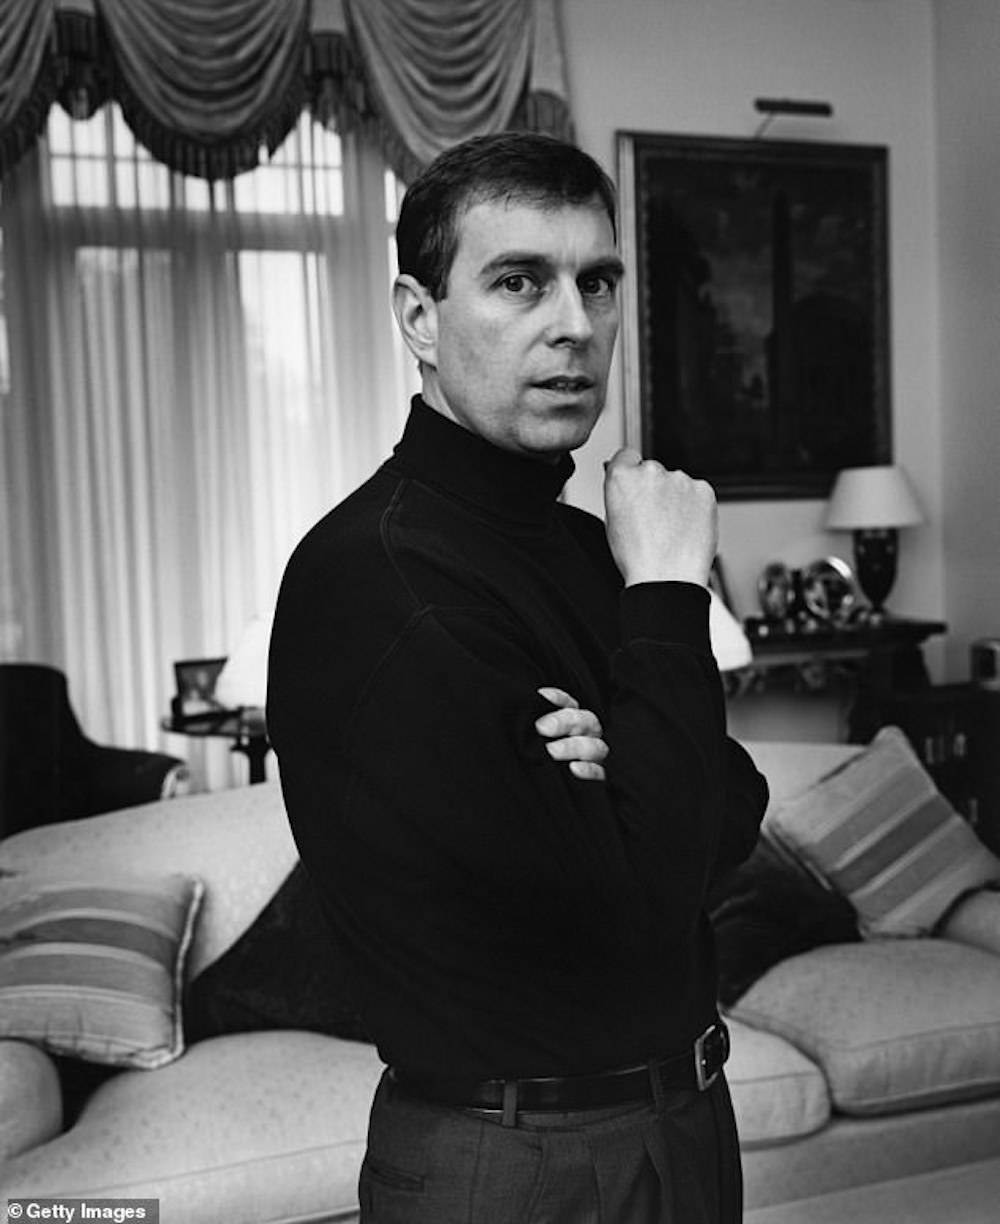 Prince Andrew as photographed by John Stoddart in 2000. © John Stoddart/Getty Images